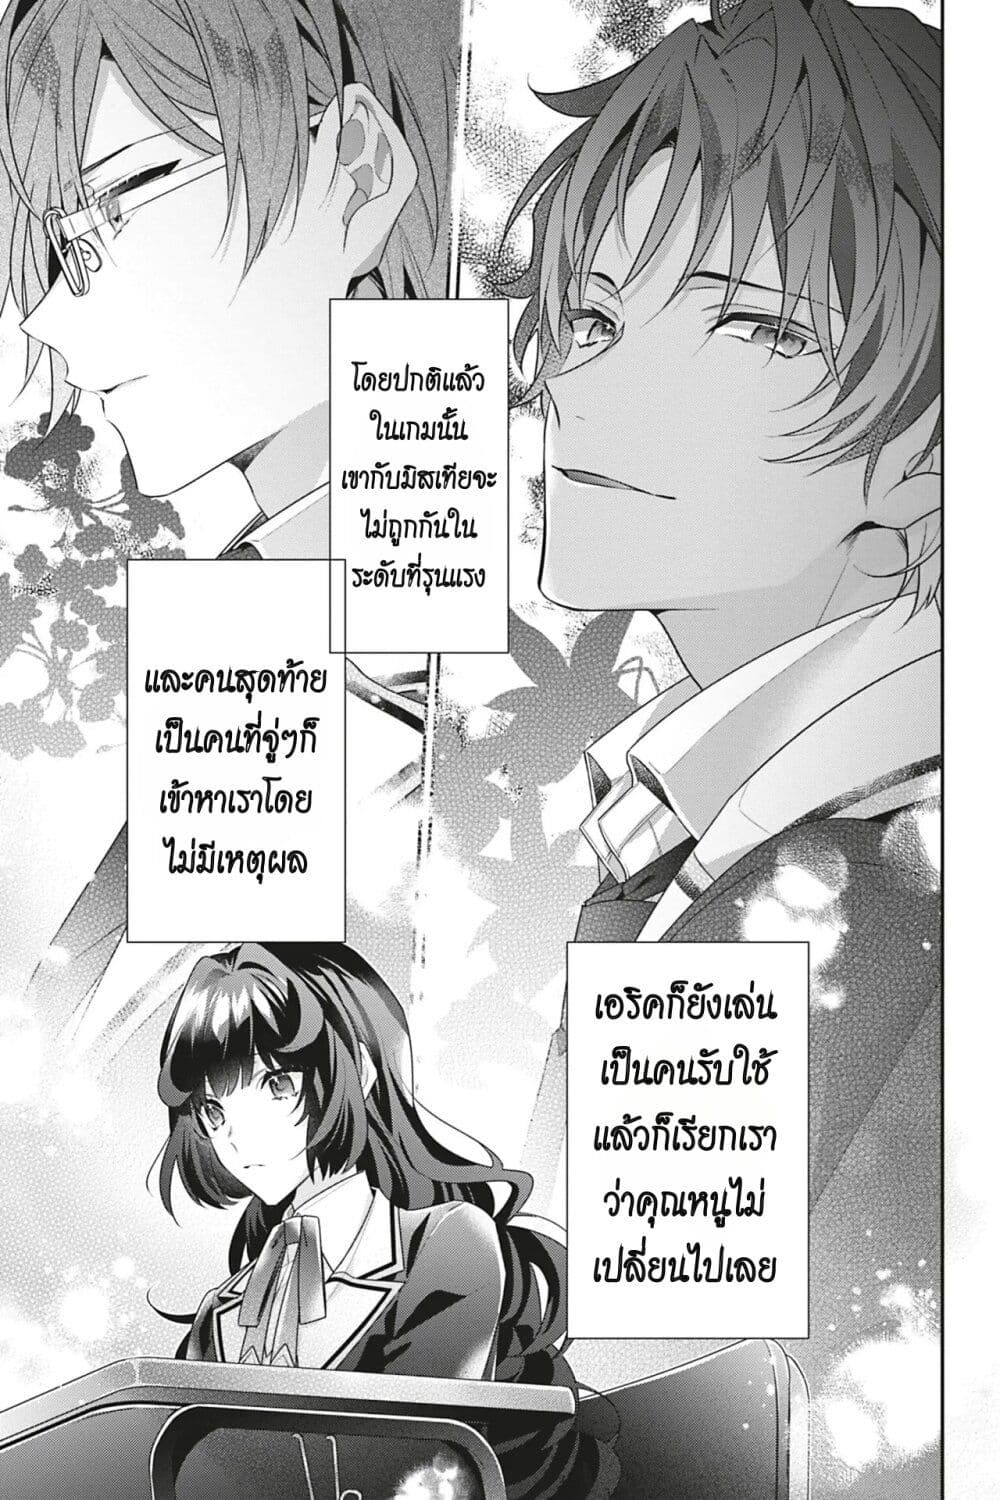 I Was Reincarnated as the Villainess in an Otome Game but the Boys Love Me Anyway! เกิดใหม่เป็นนางร้าย แต่เป้าหมายการจีบสุดจะไม่ปกติ !! 9-9